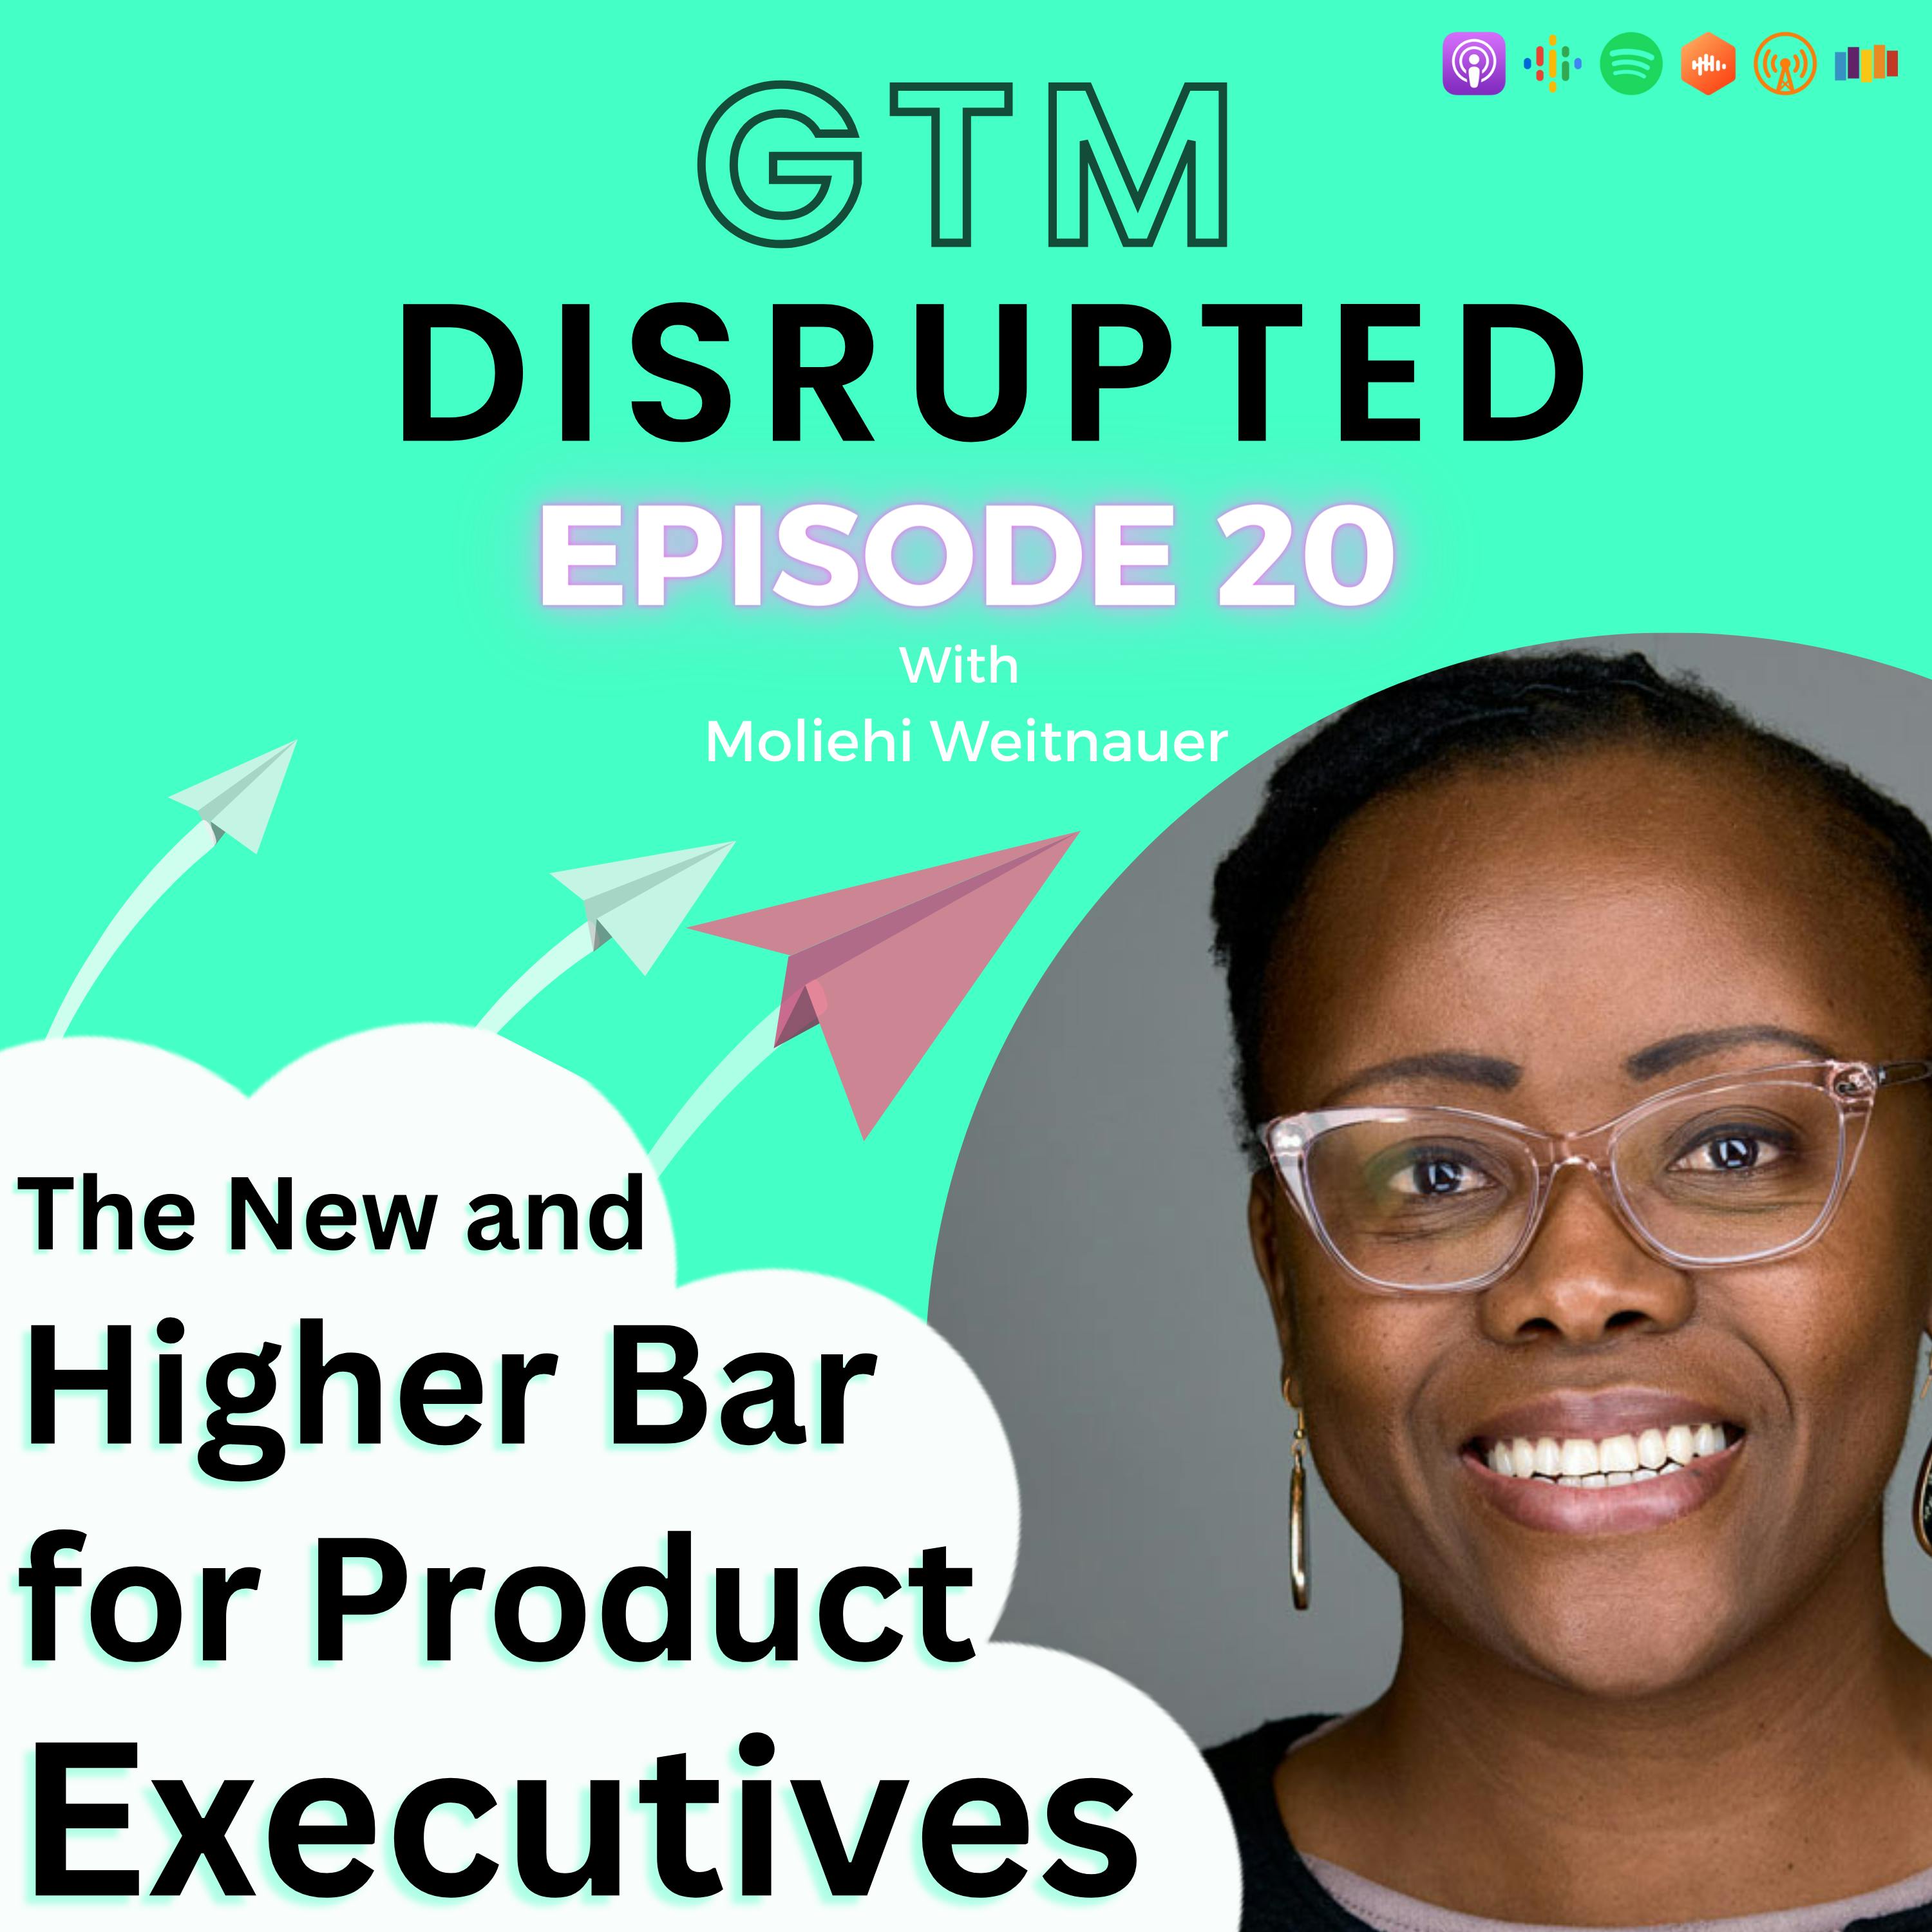 The New and Higher Bar for Product Executives